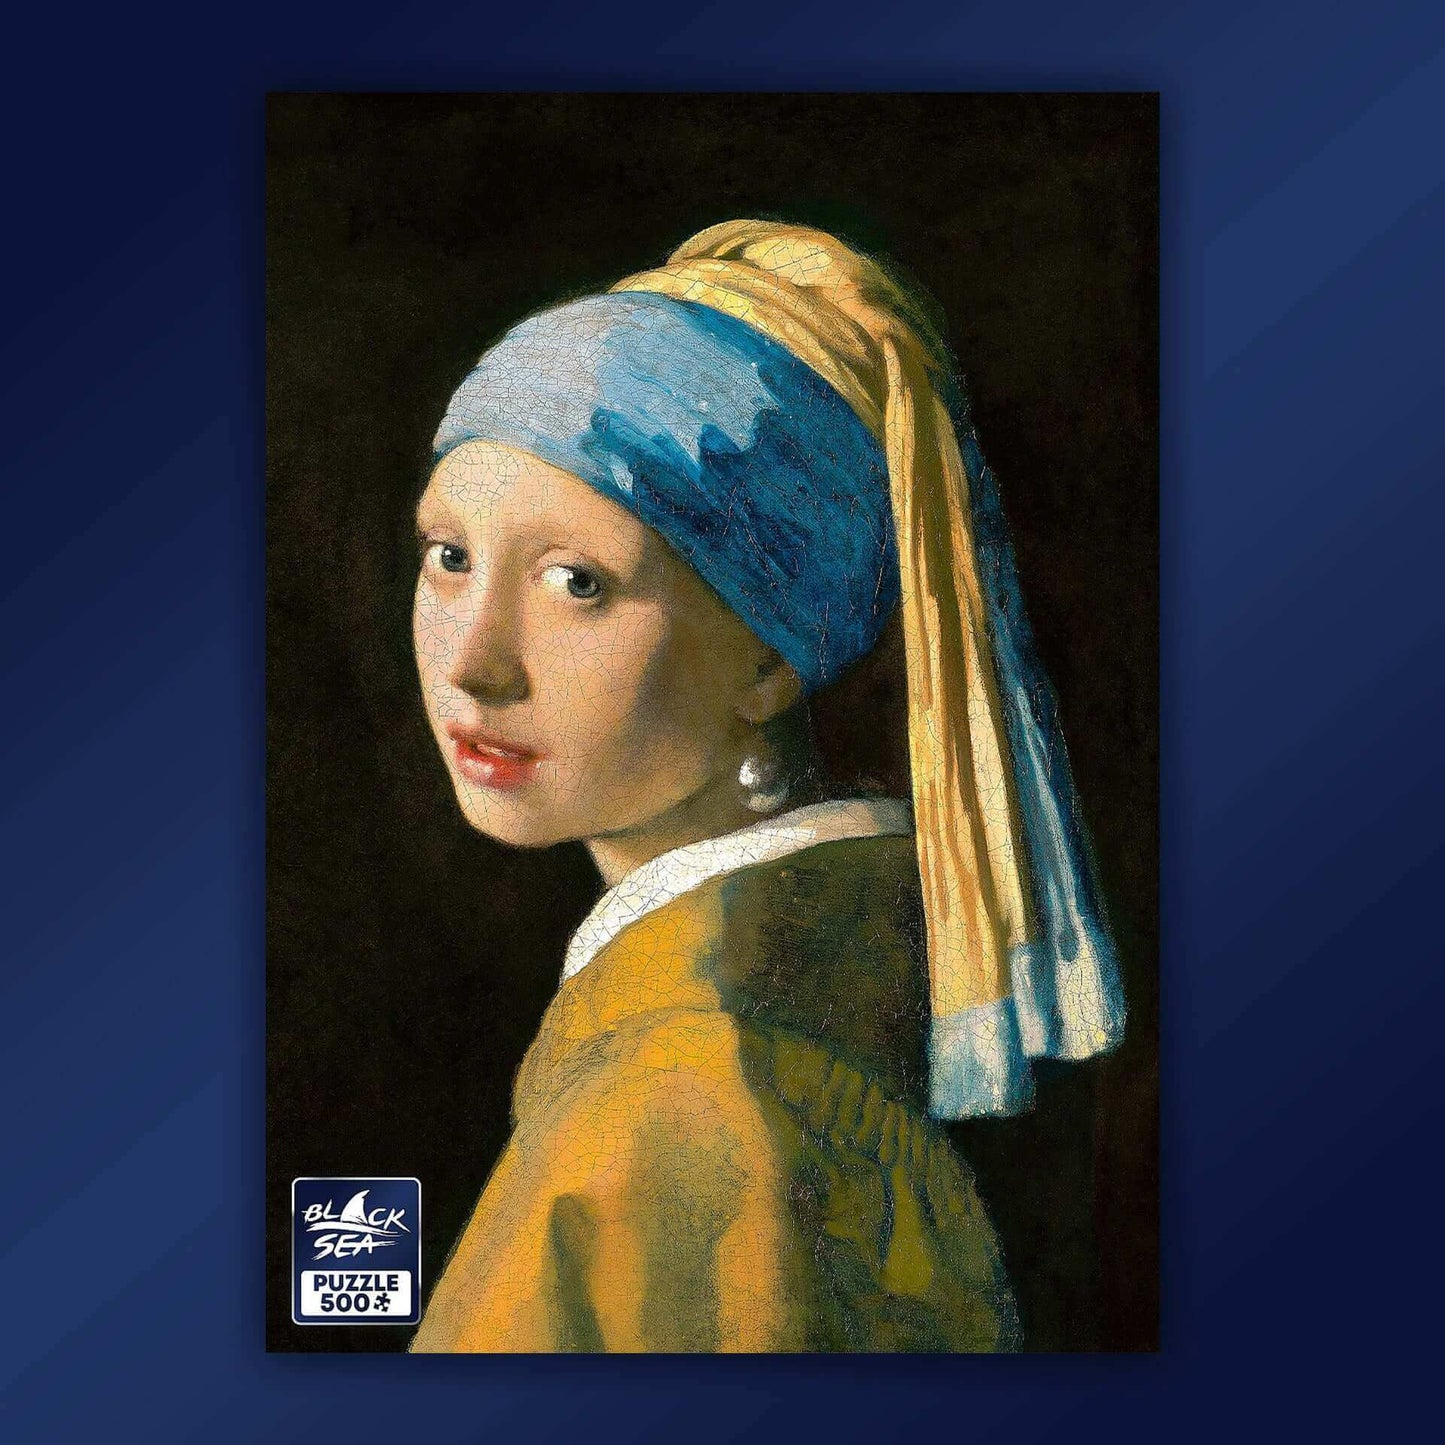 Puzzle Black Sea 500 pieces - Girl with a Pearl Earring, -